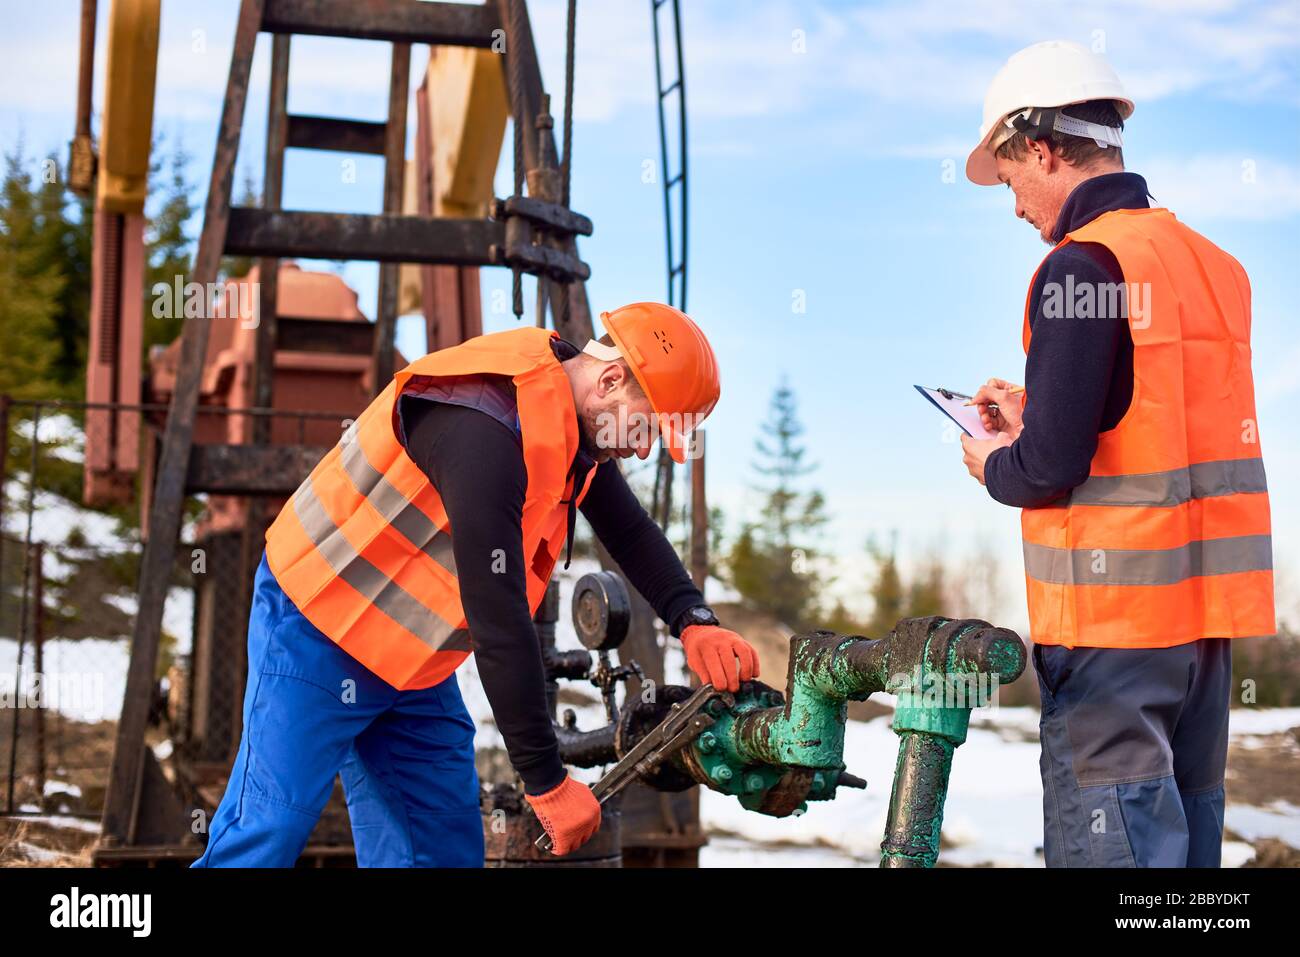 Two oil workers wearing overalls, orange vests, and helmets, working on oil field next to oil pump jack, one is wrenching the pipe, the other making notes. Concept of petroleum industry, collaboration Stock Photo